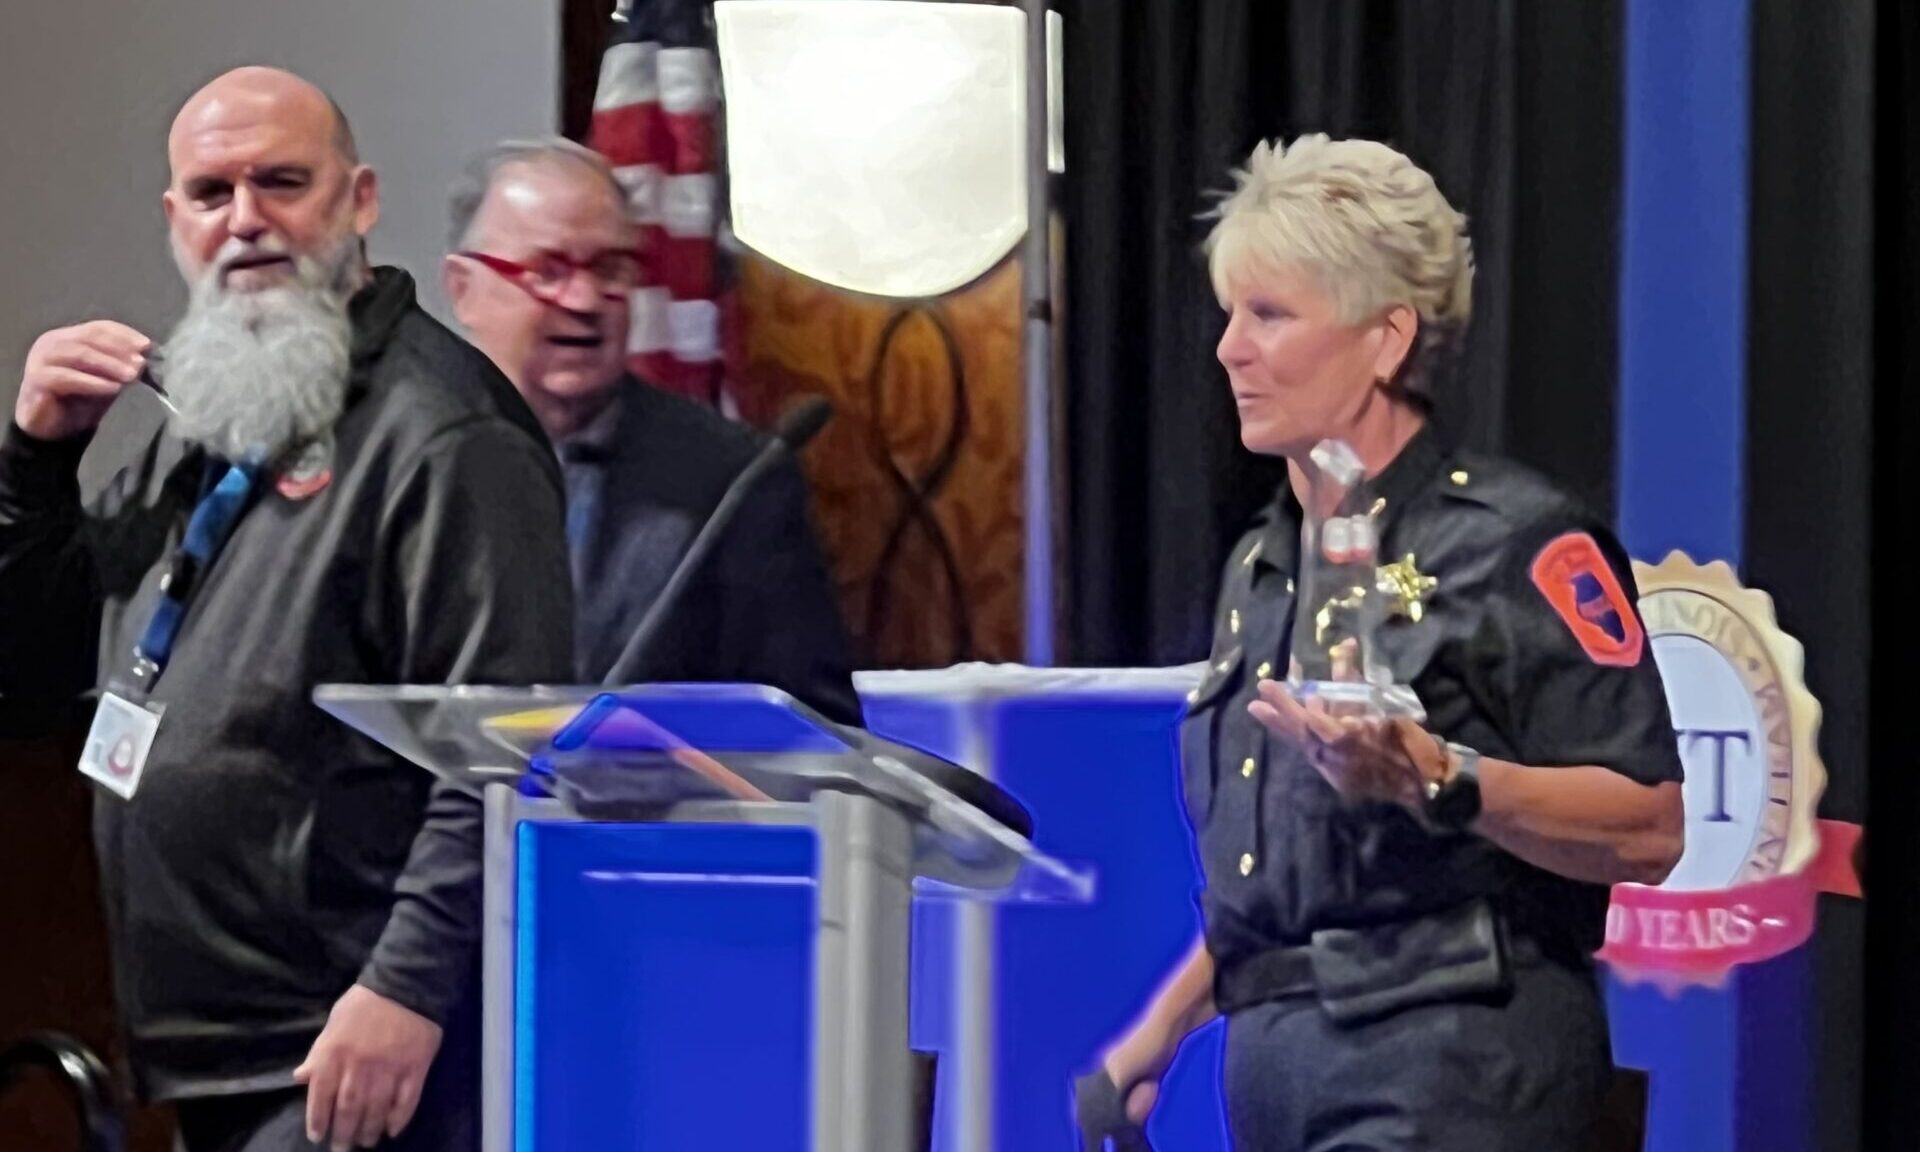 Chief Cary in a UIPD uniform holds a glass award while standing at a lectern.